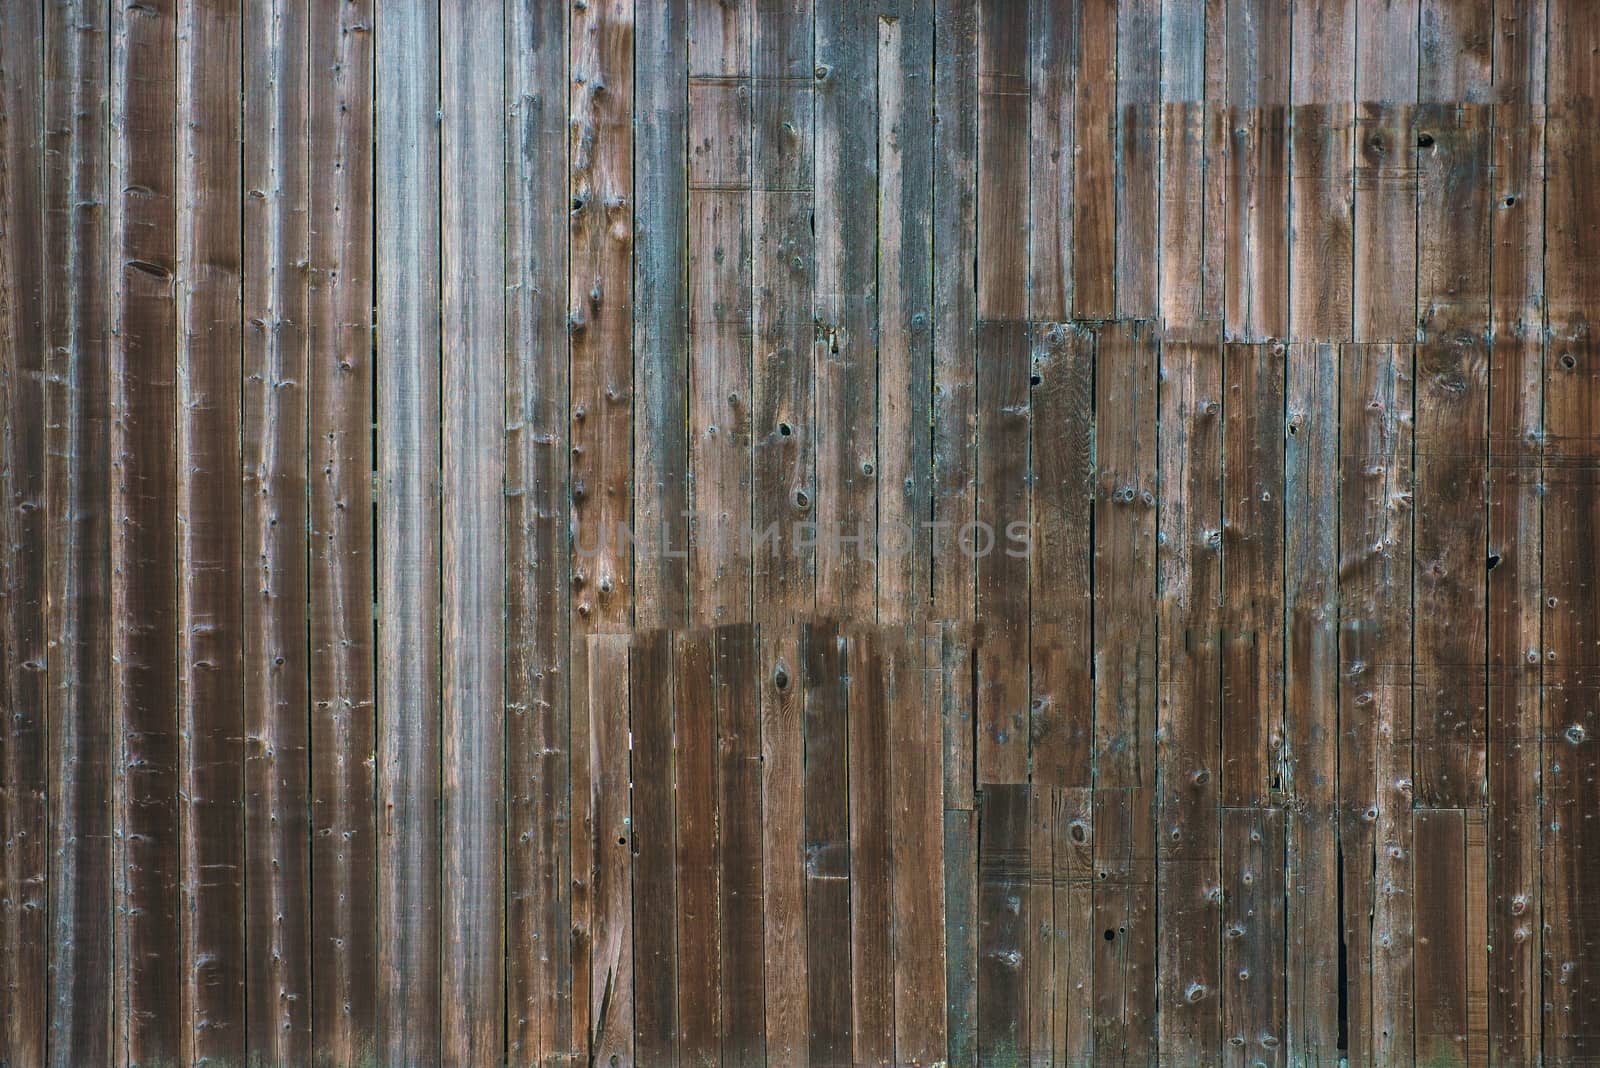 Aged Barn Wooden Wall Background. Aged Planks Wall Photo Backdrop.